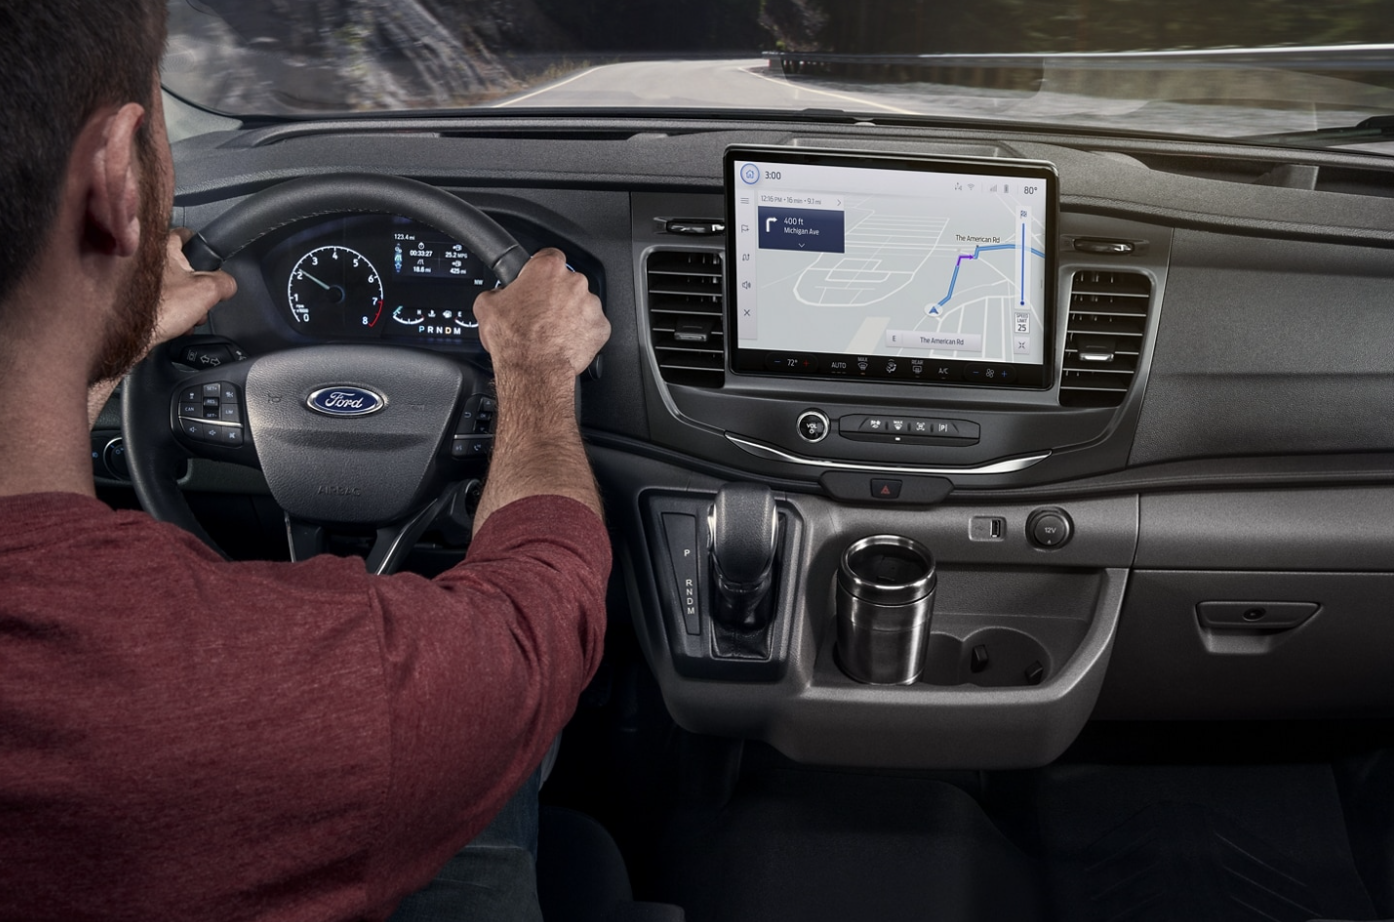 A view of the infotainment system and dash of a 2023 Ford E-Series